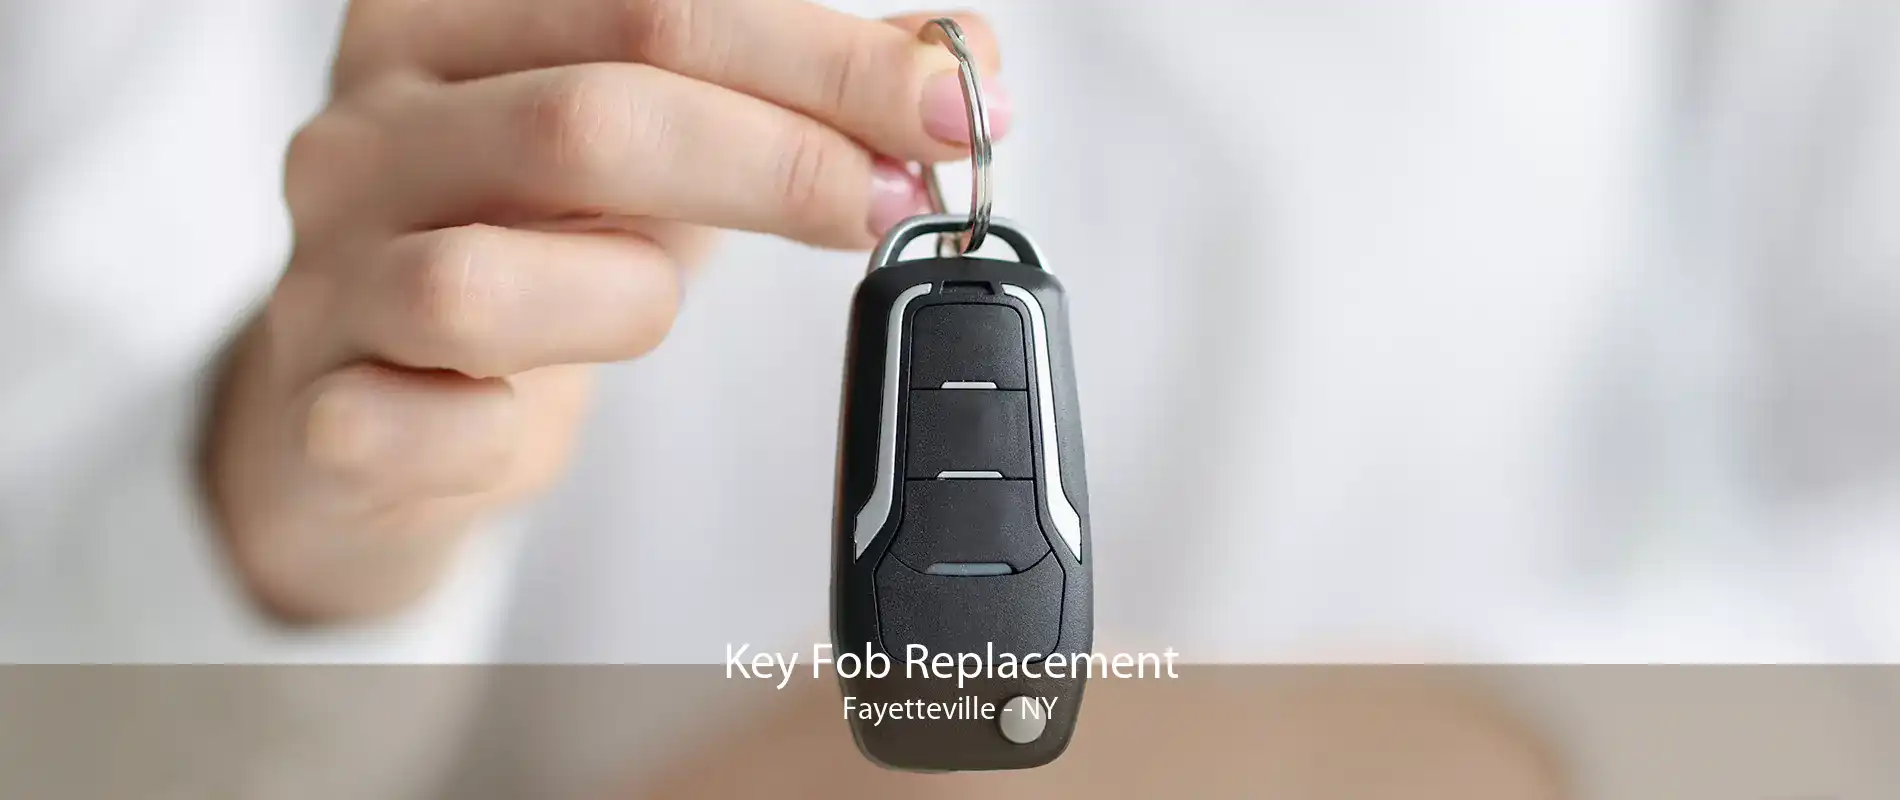 Key Fob Replacement Fayetteville - NY